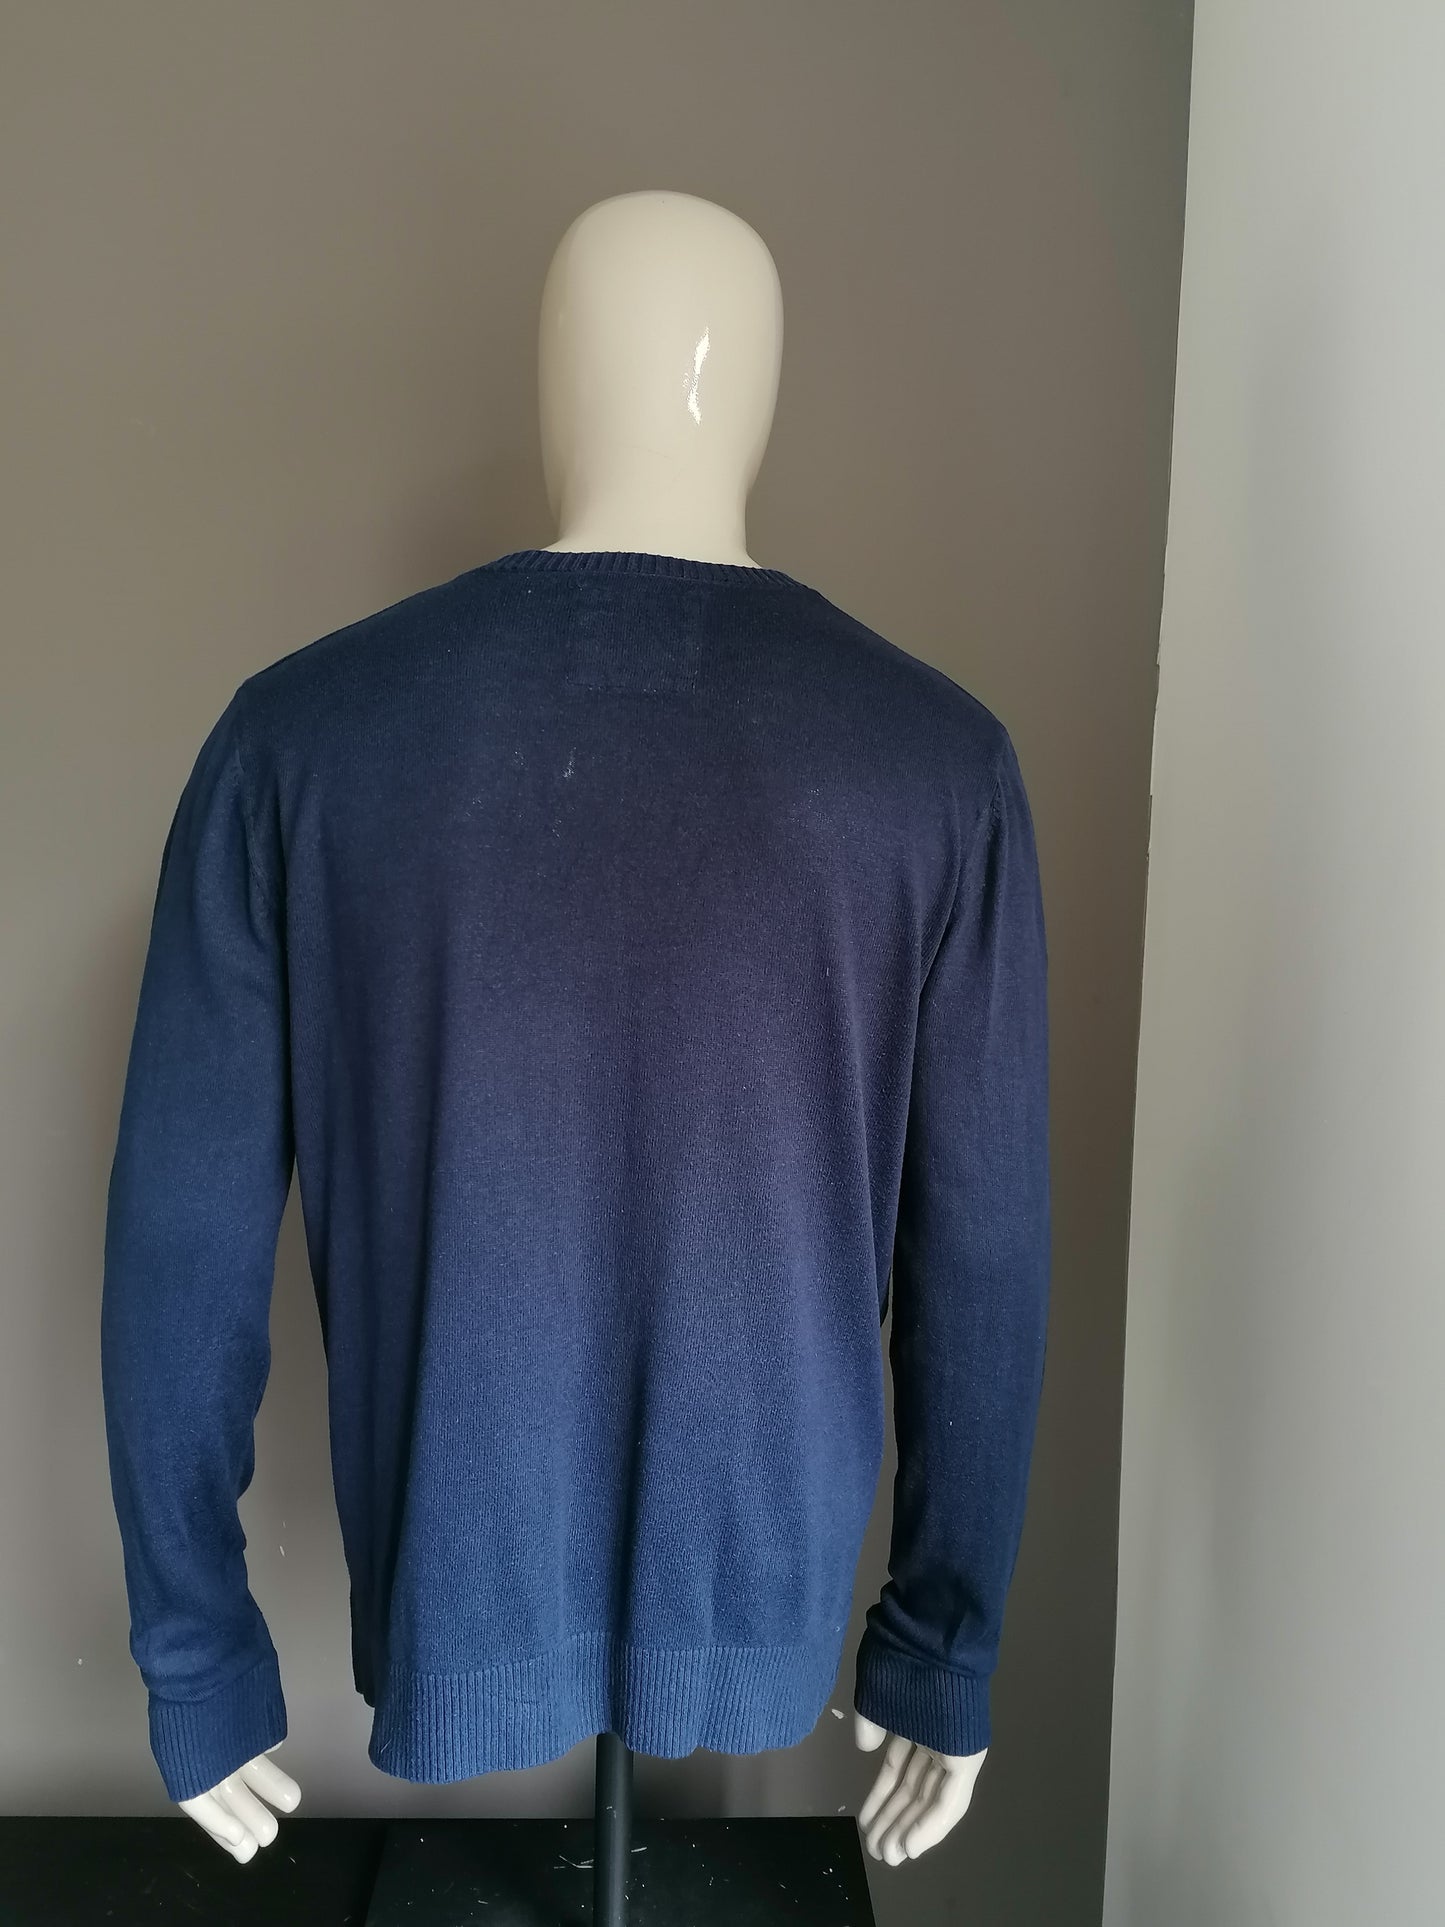 Hollister sweater with V-neck. Dark blue colored. Size XL.